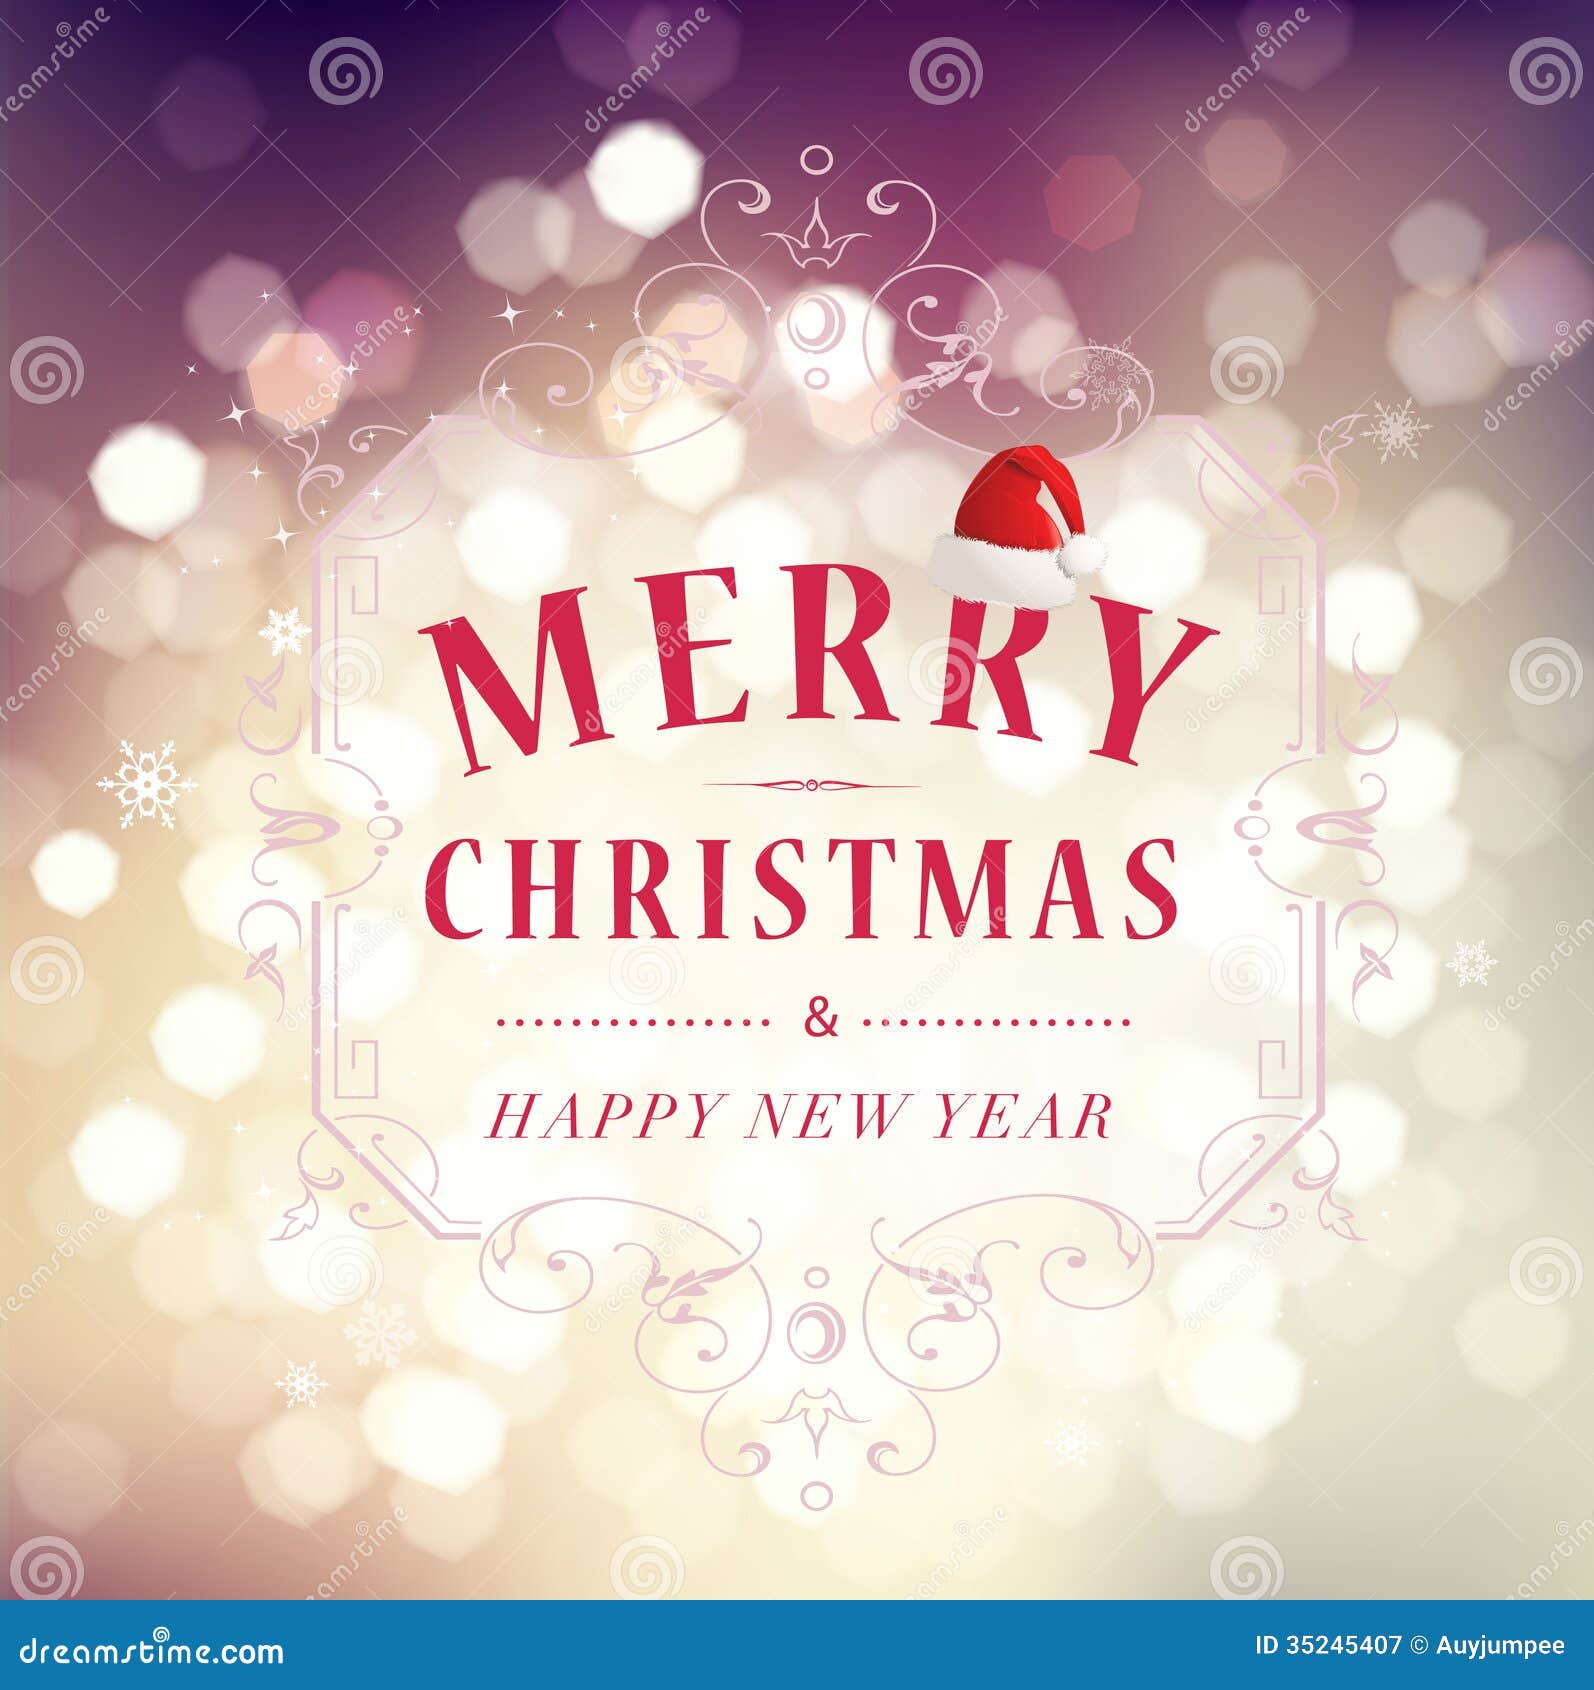 Merry Christmas And Happy New Year Greeting Royalty Free 